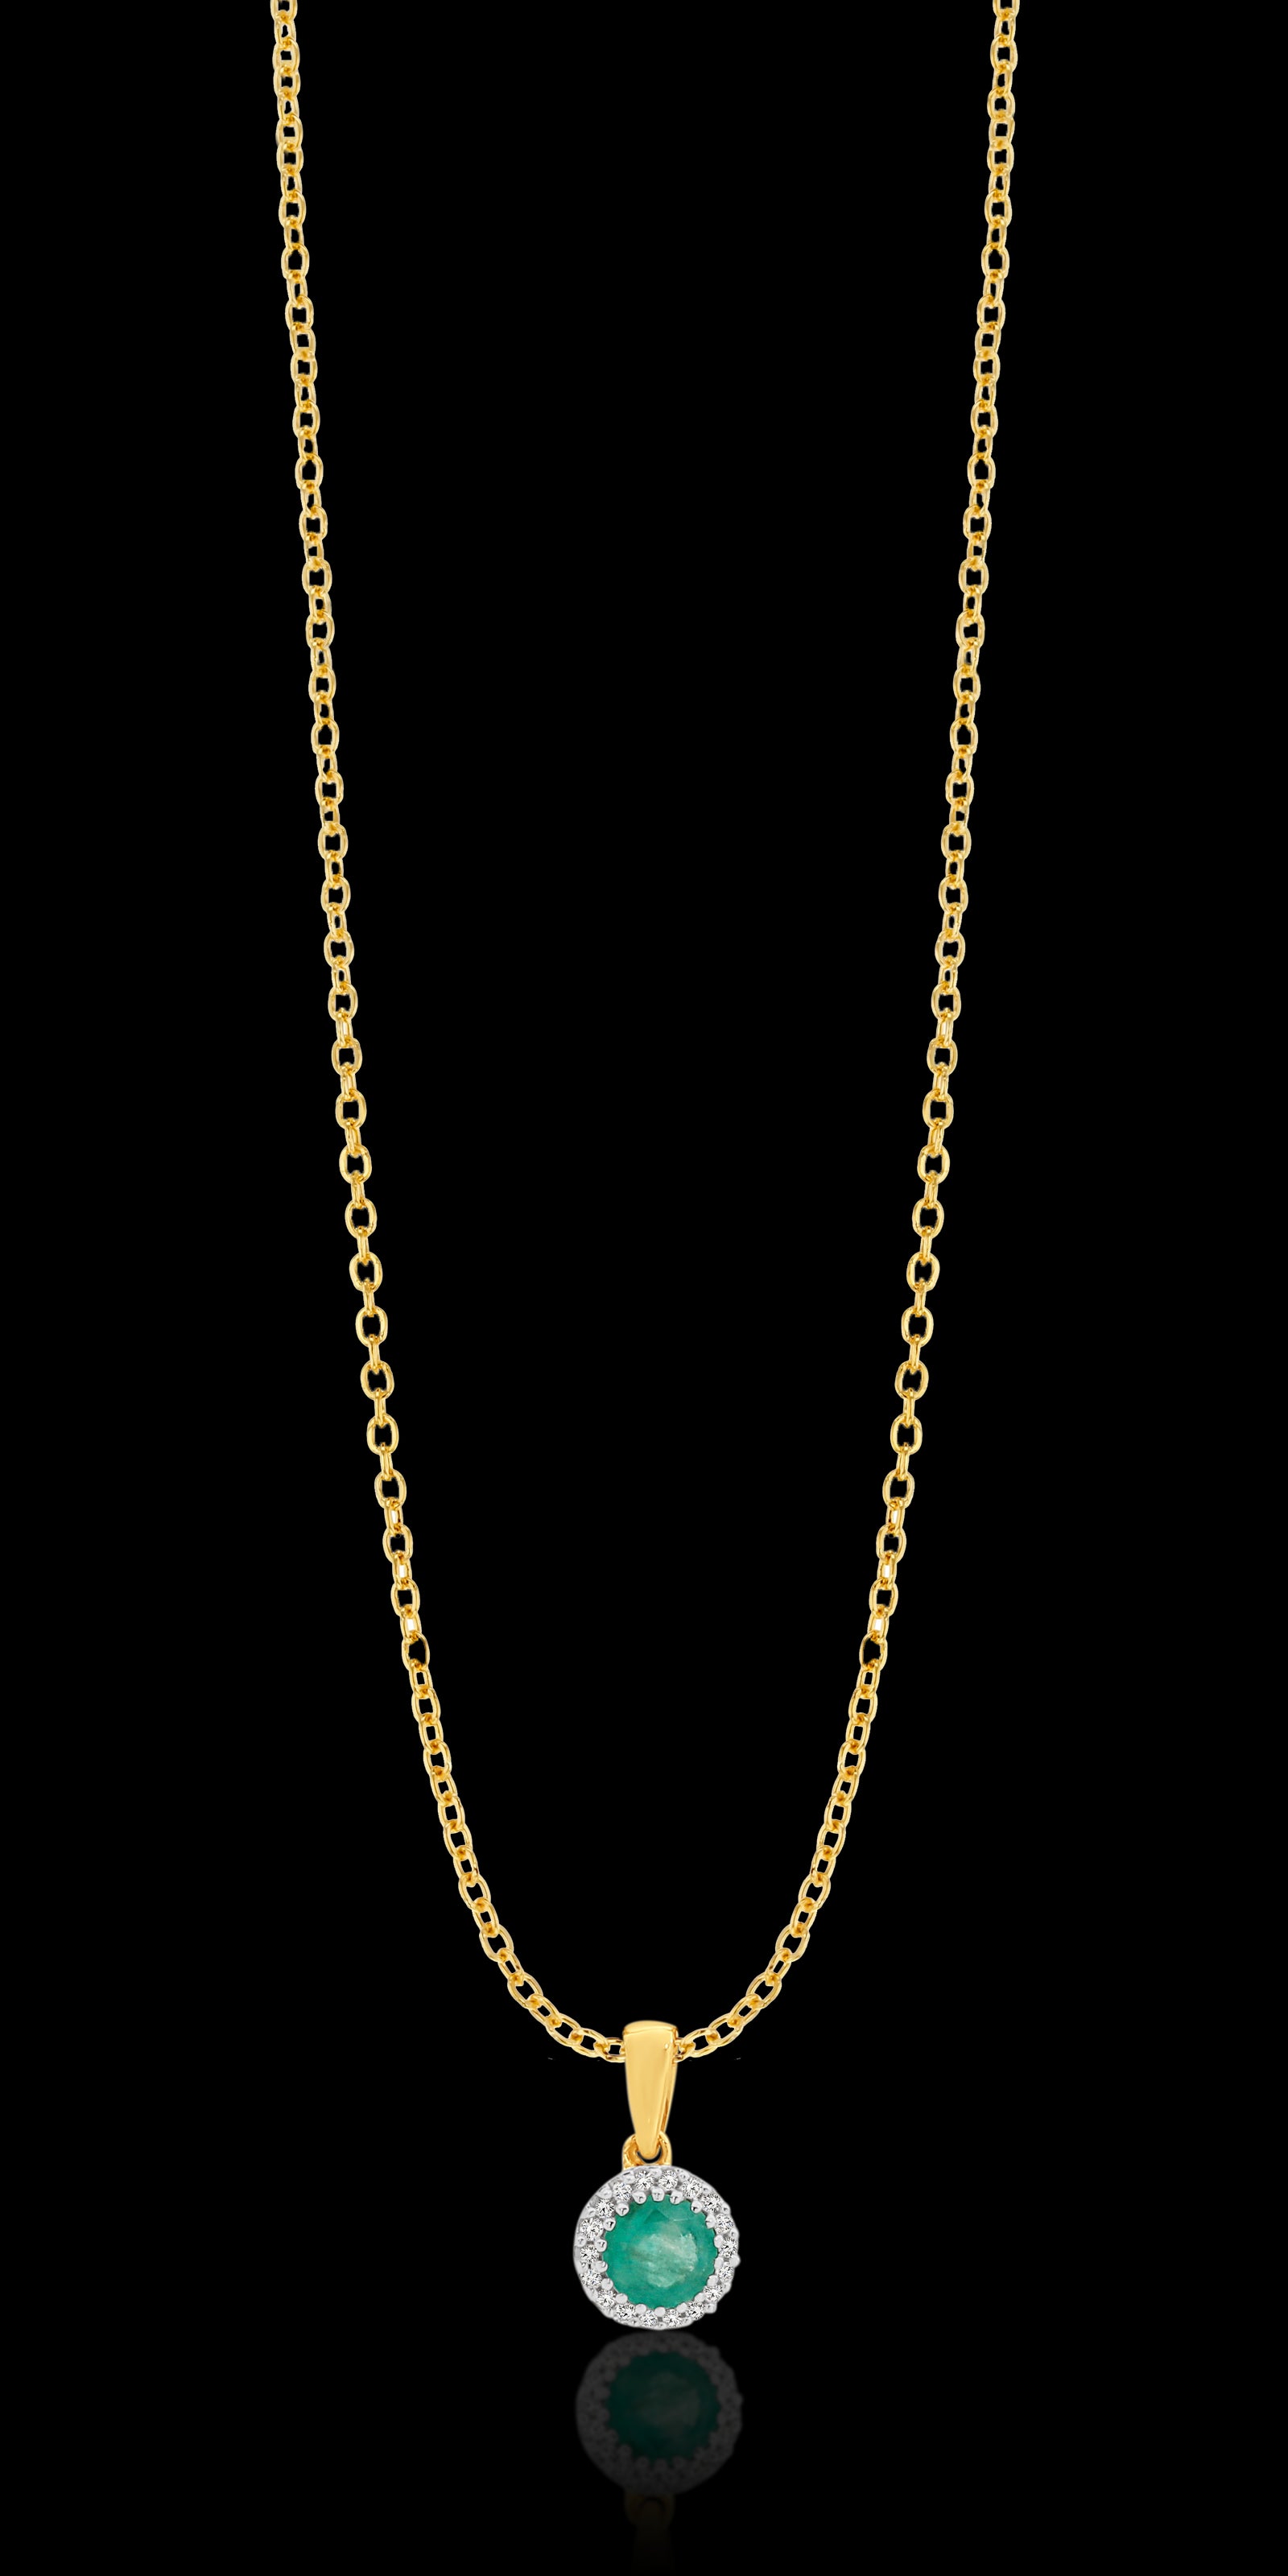 Hammered Cable Chain in 9 Carat Yellow Gold